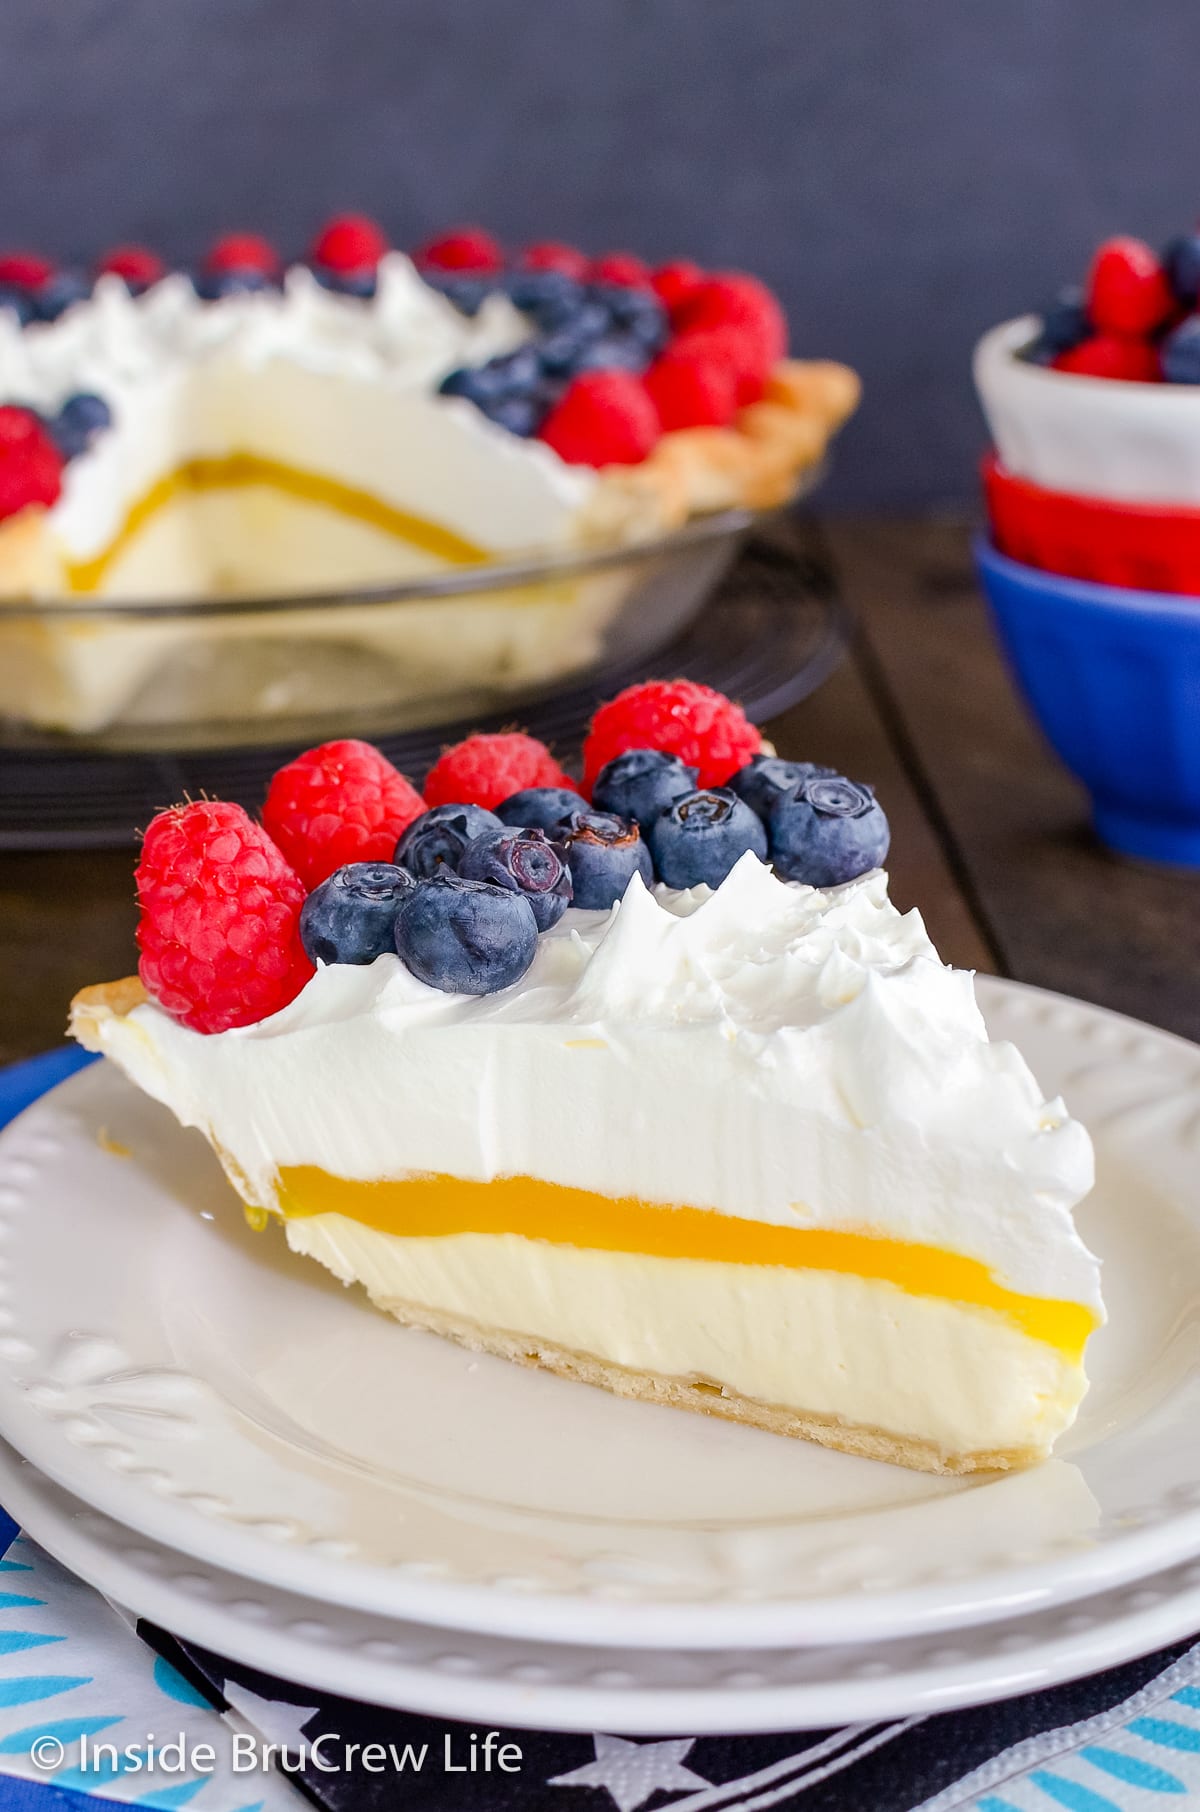 A slice of lemon pie topped with berries on a white plate.